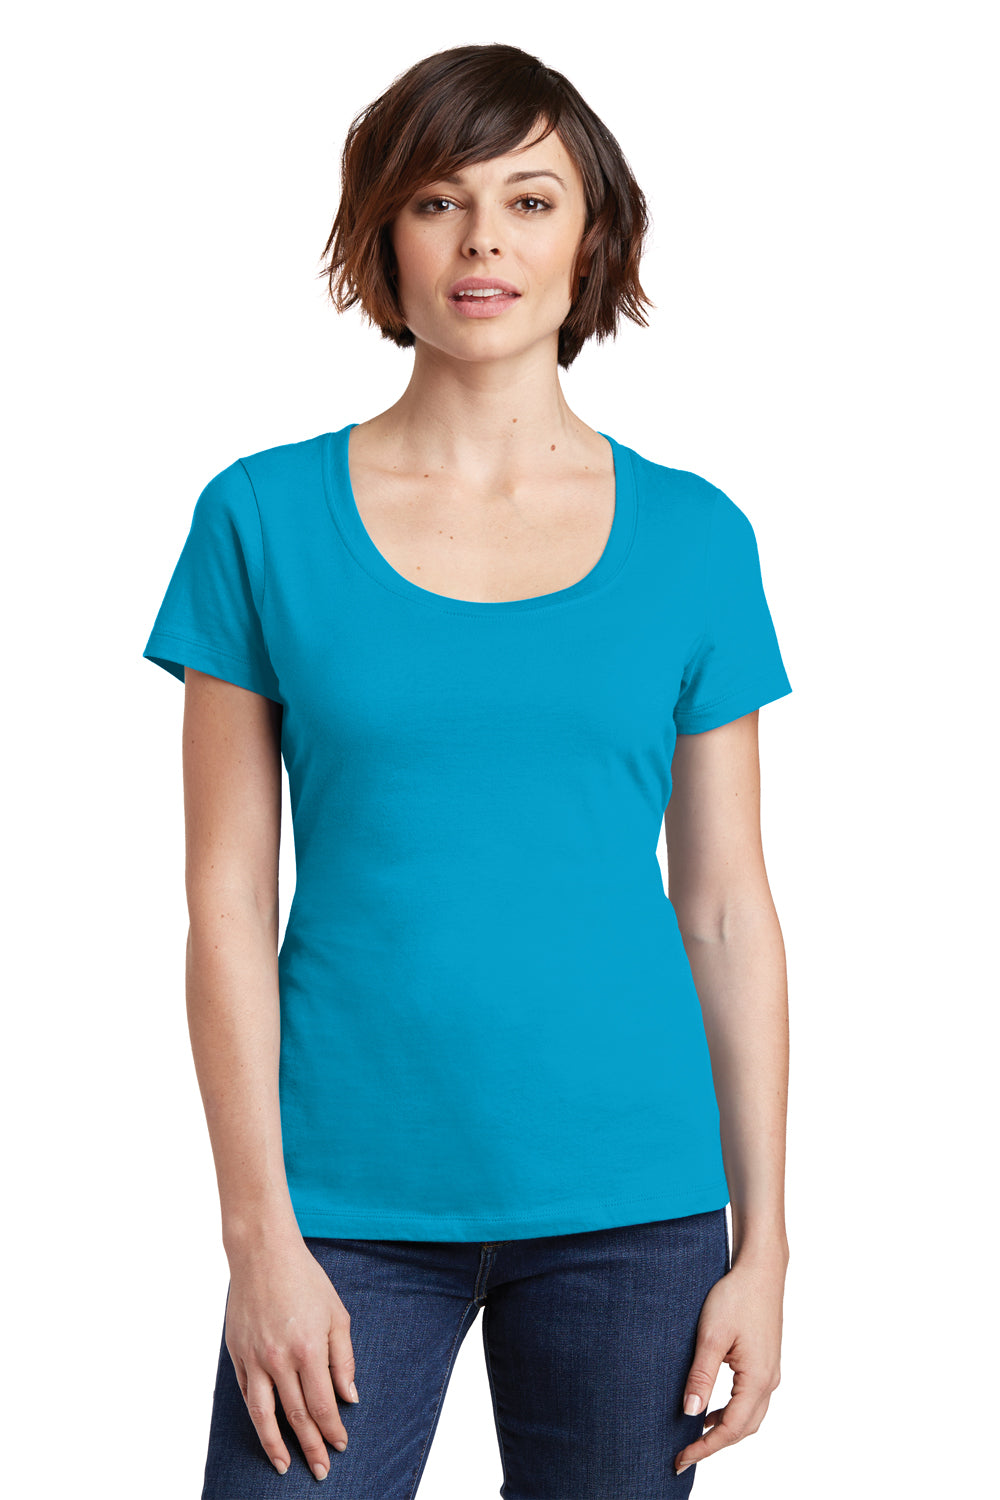 District DM106L Womens Perfect Weight Short Sleeve Scoop Neck T-Shirt Turquoise Blue Front